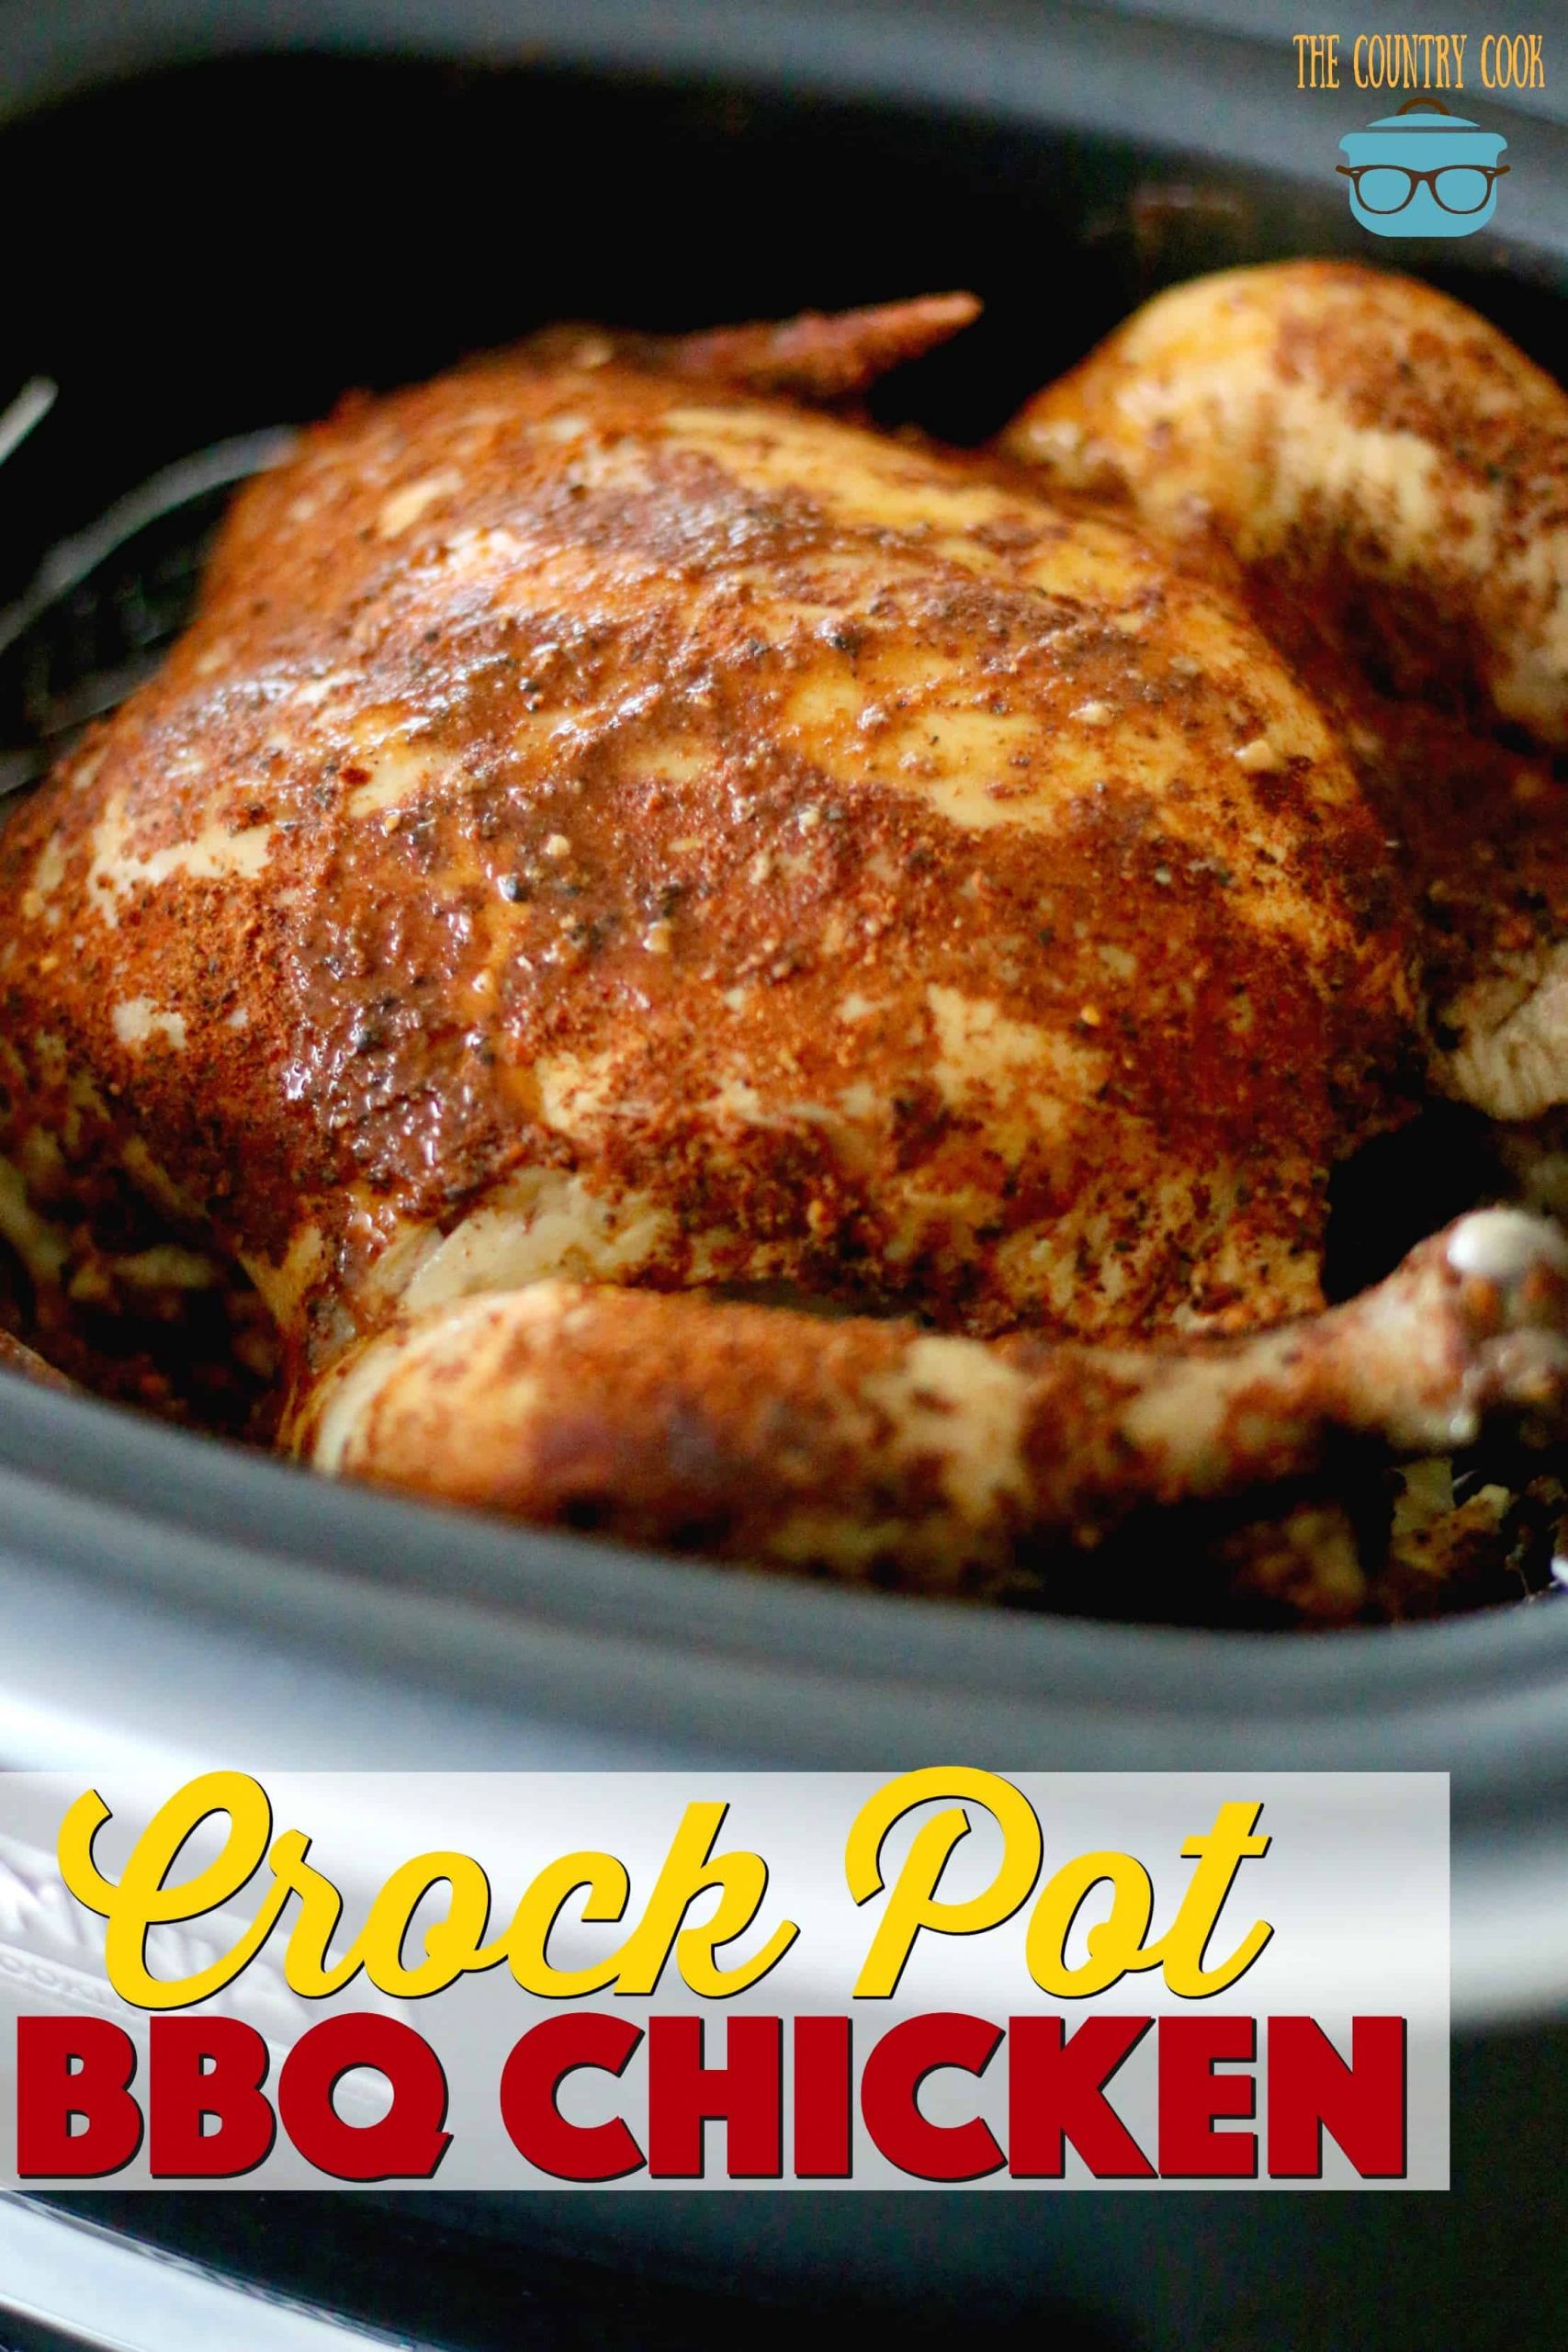 Crockpot Whole Chicken Recipe
 Crock Pot Whole BBQ Chicken The Country Cook slow cooker